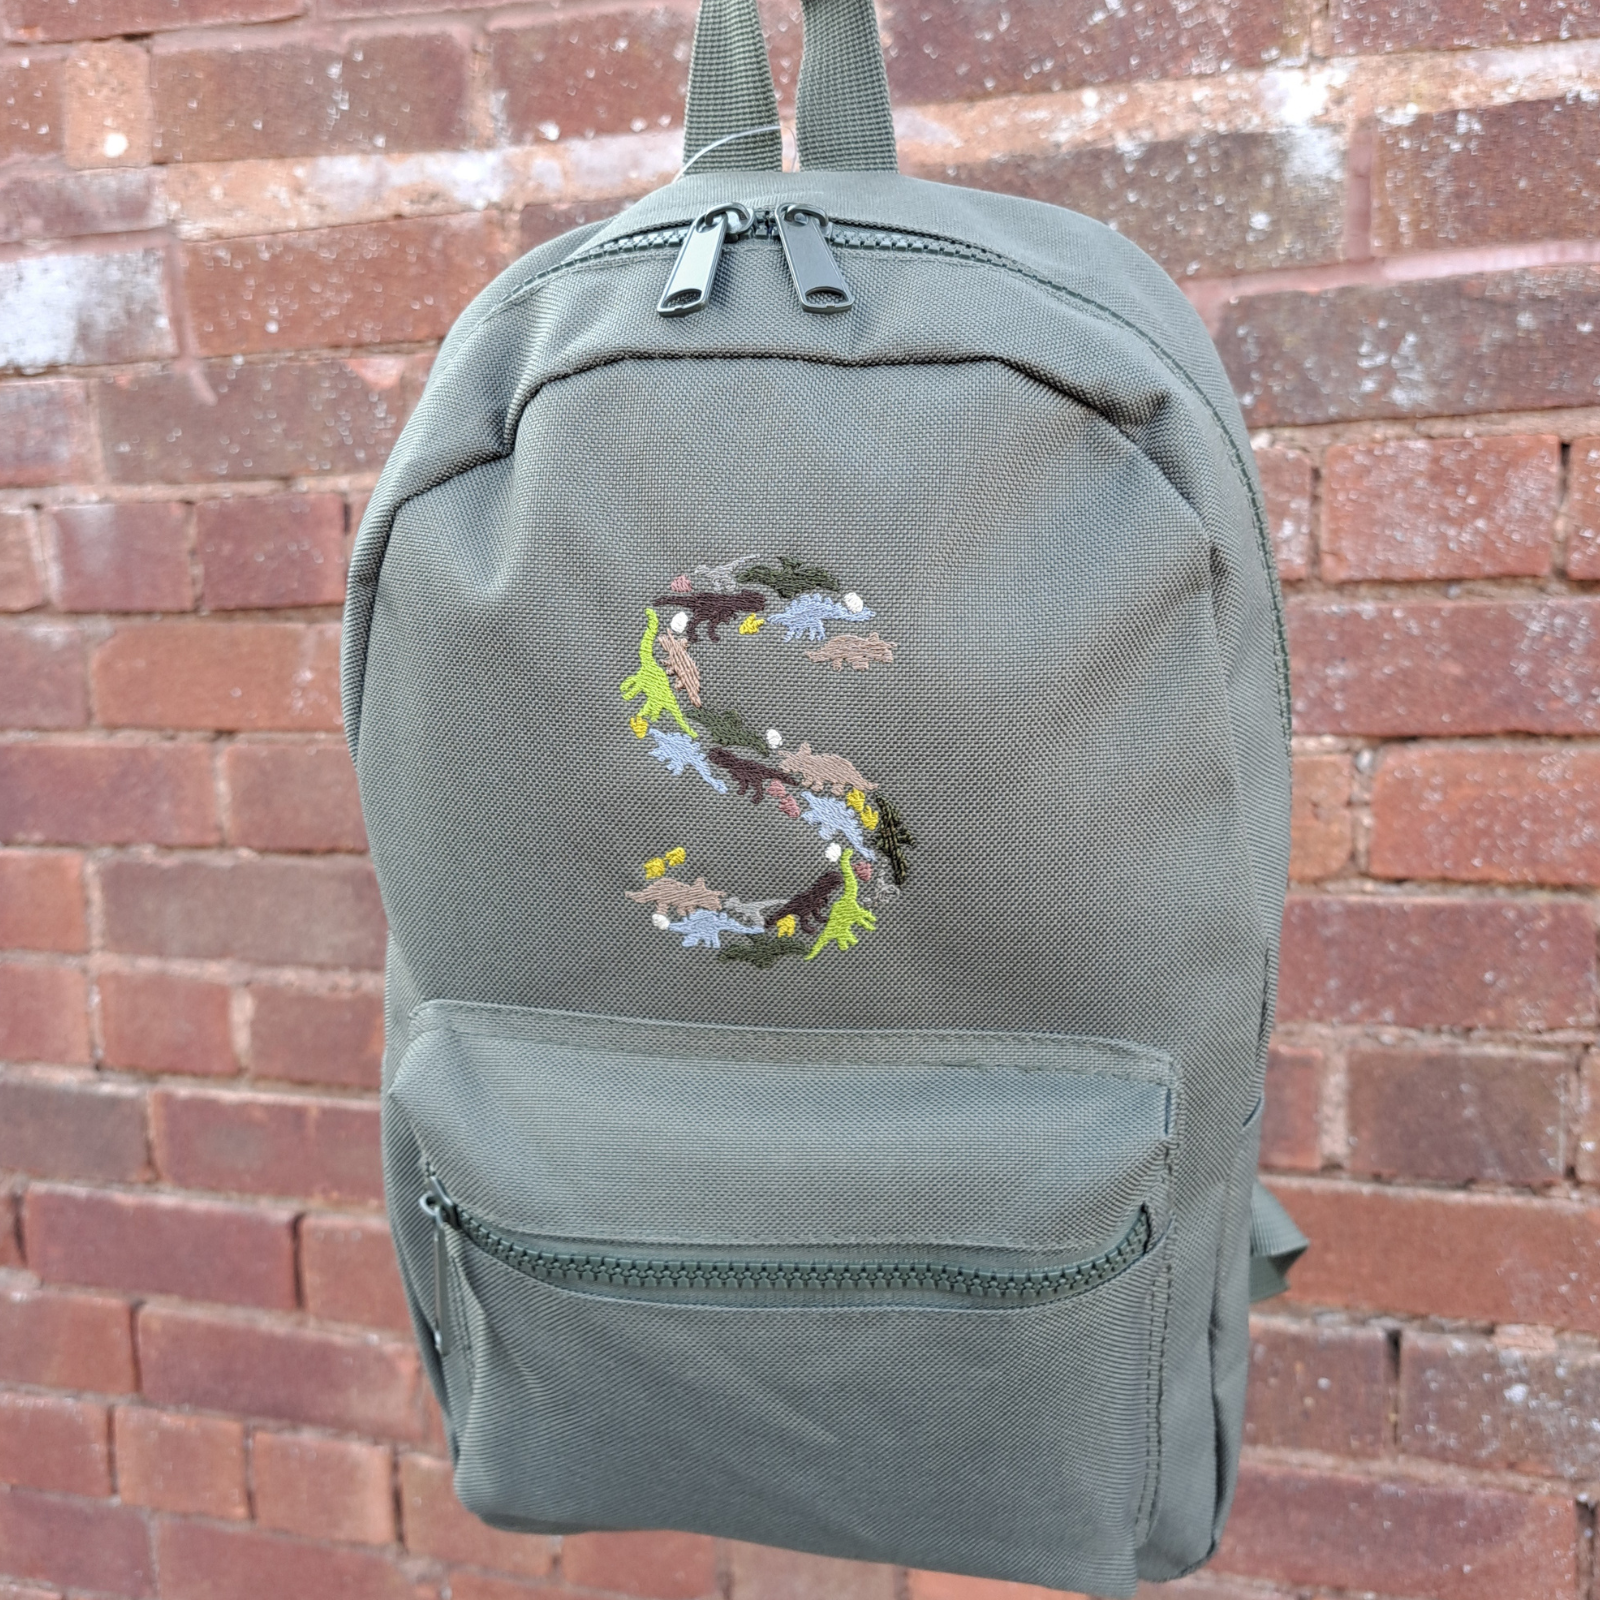 Image of a khaki green child's rucksack which has been embroidered on the front with a capital S which is made up from images of dinosaurs, footprints and eggs, in different coloured threads which compliment the colour of the bag. The bag is available in pistachio, powder pink, powder blue, light grey, fuchsia pink, navy blue, black, lavender and olive green. 